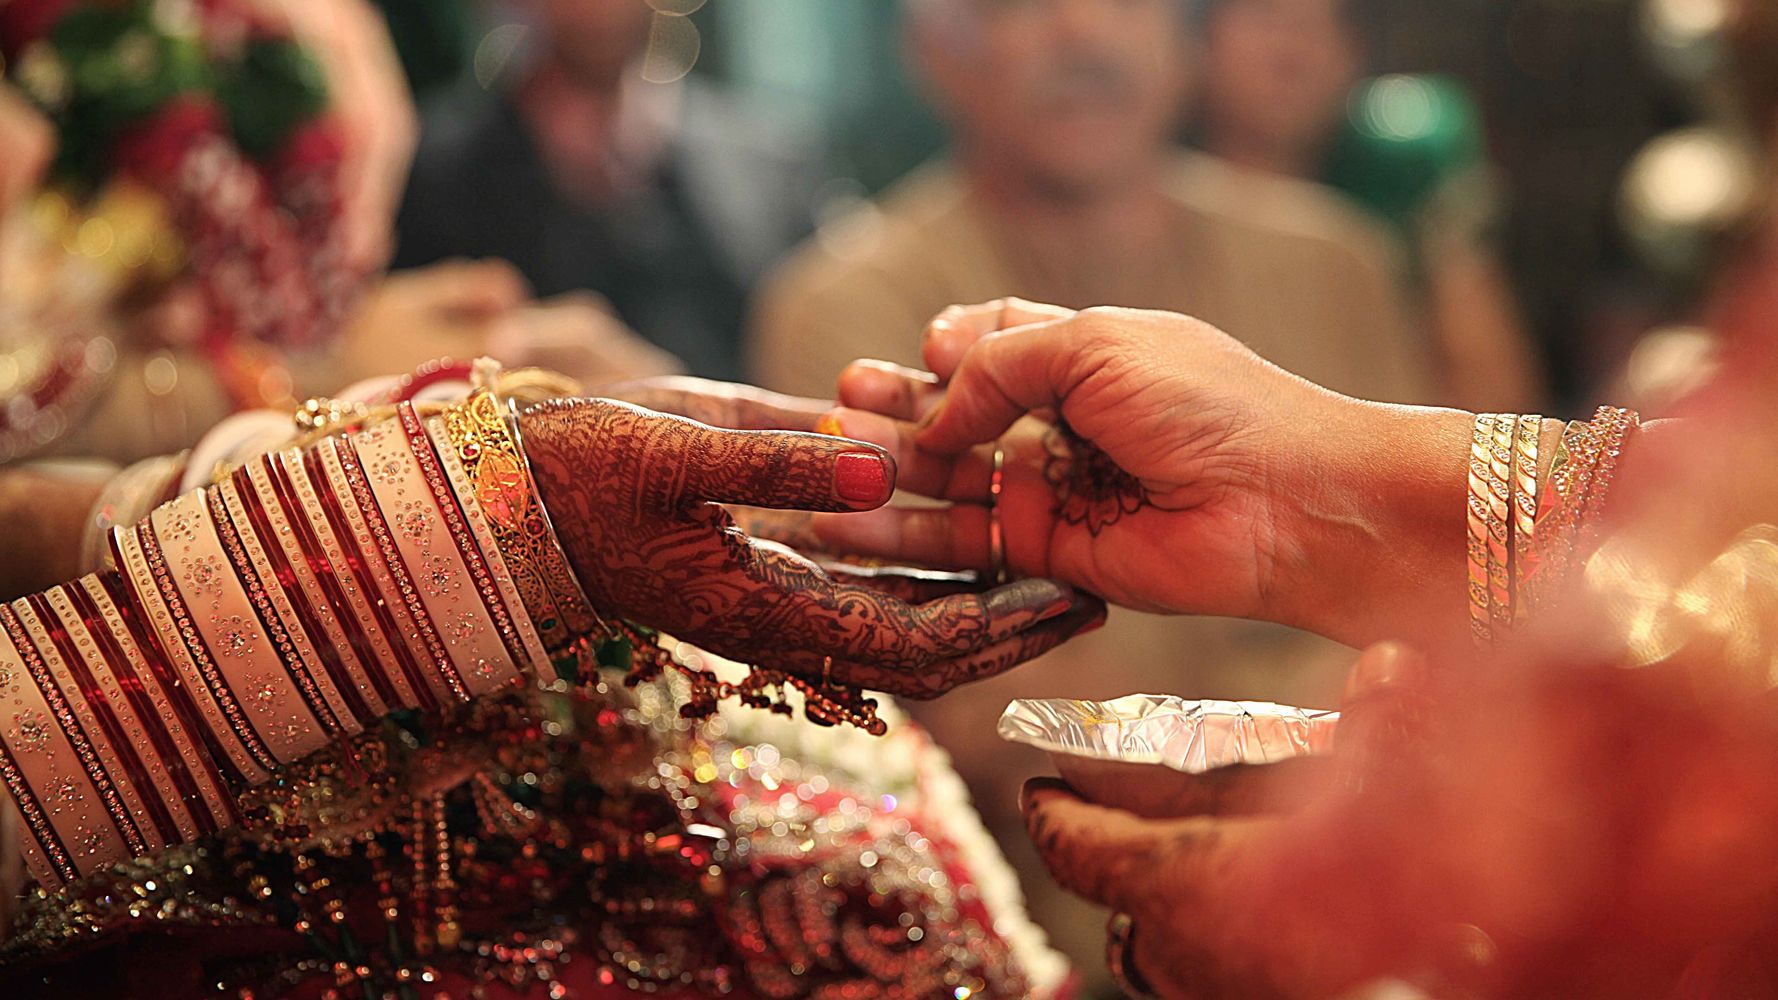 People Share Their Experience Of Being In An Arranged Marriage